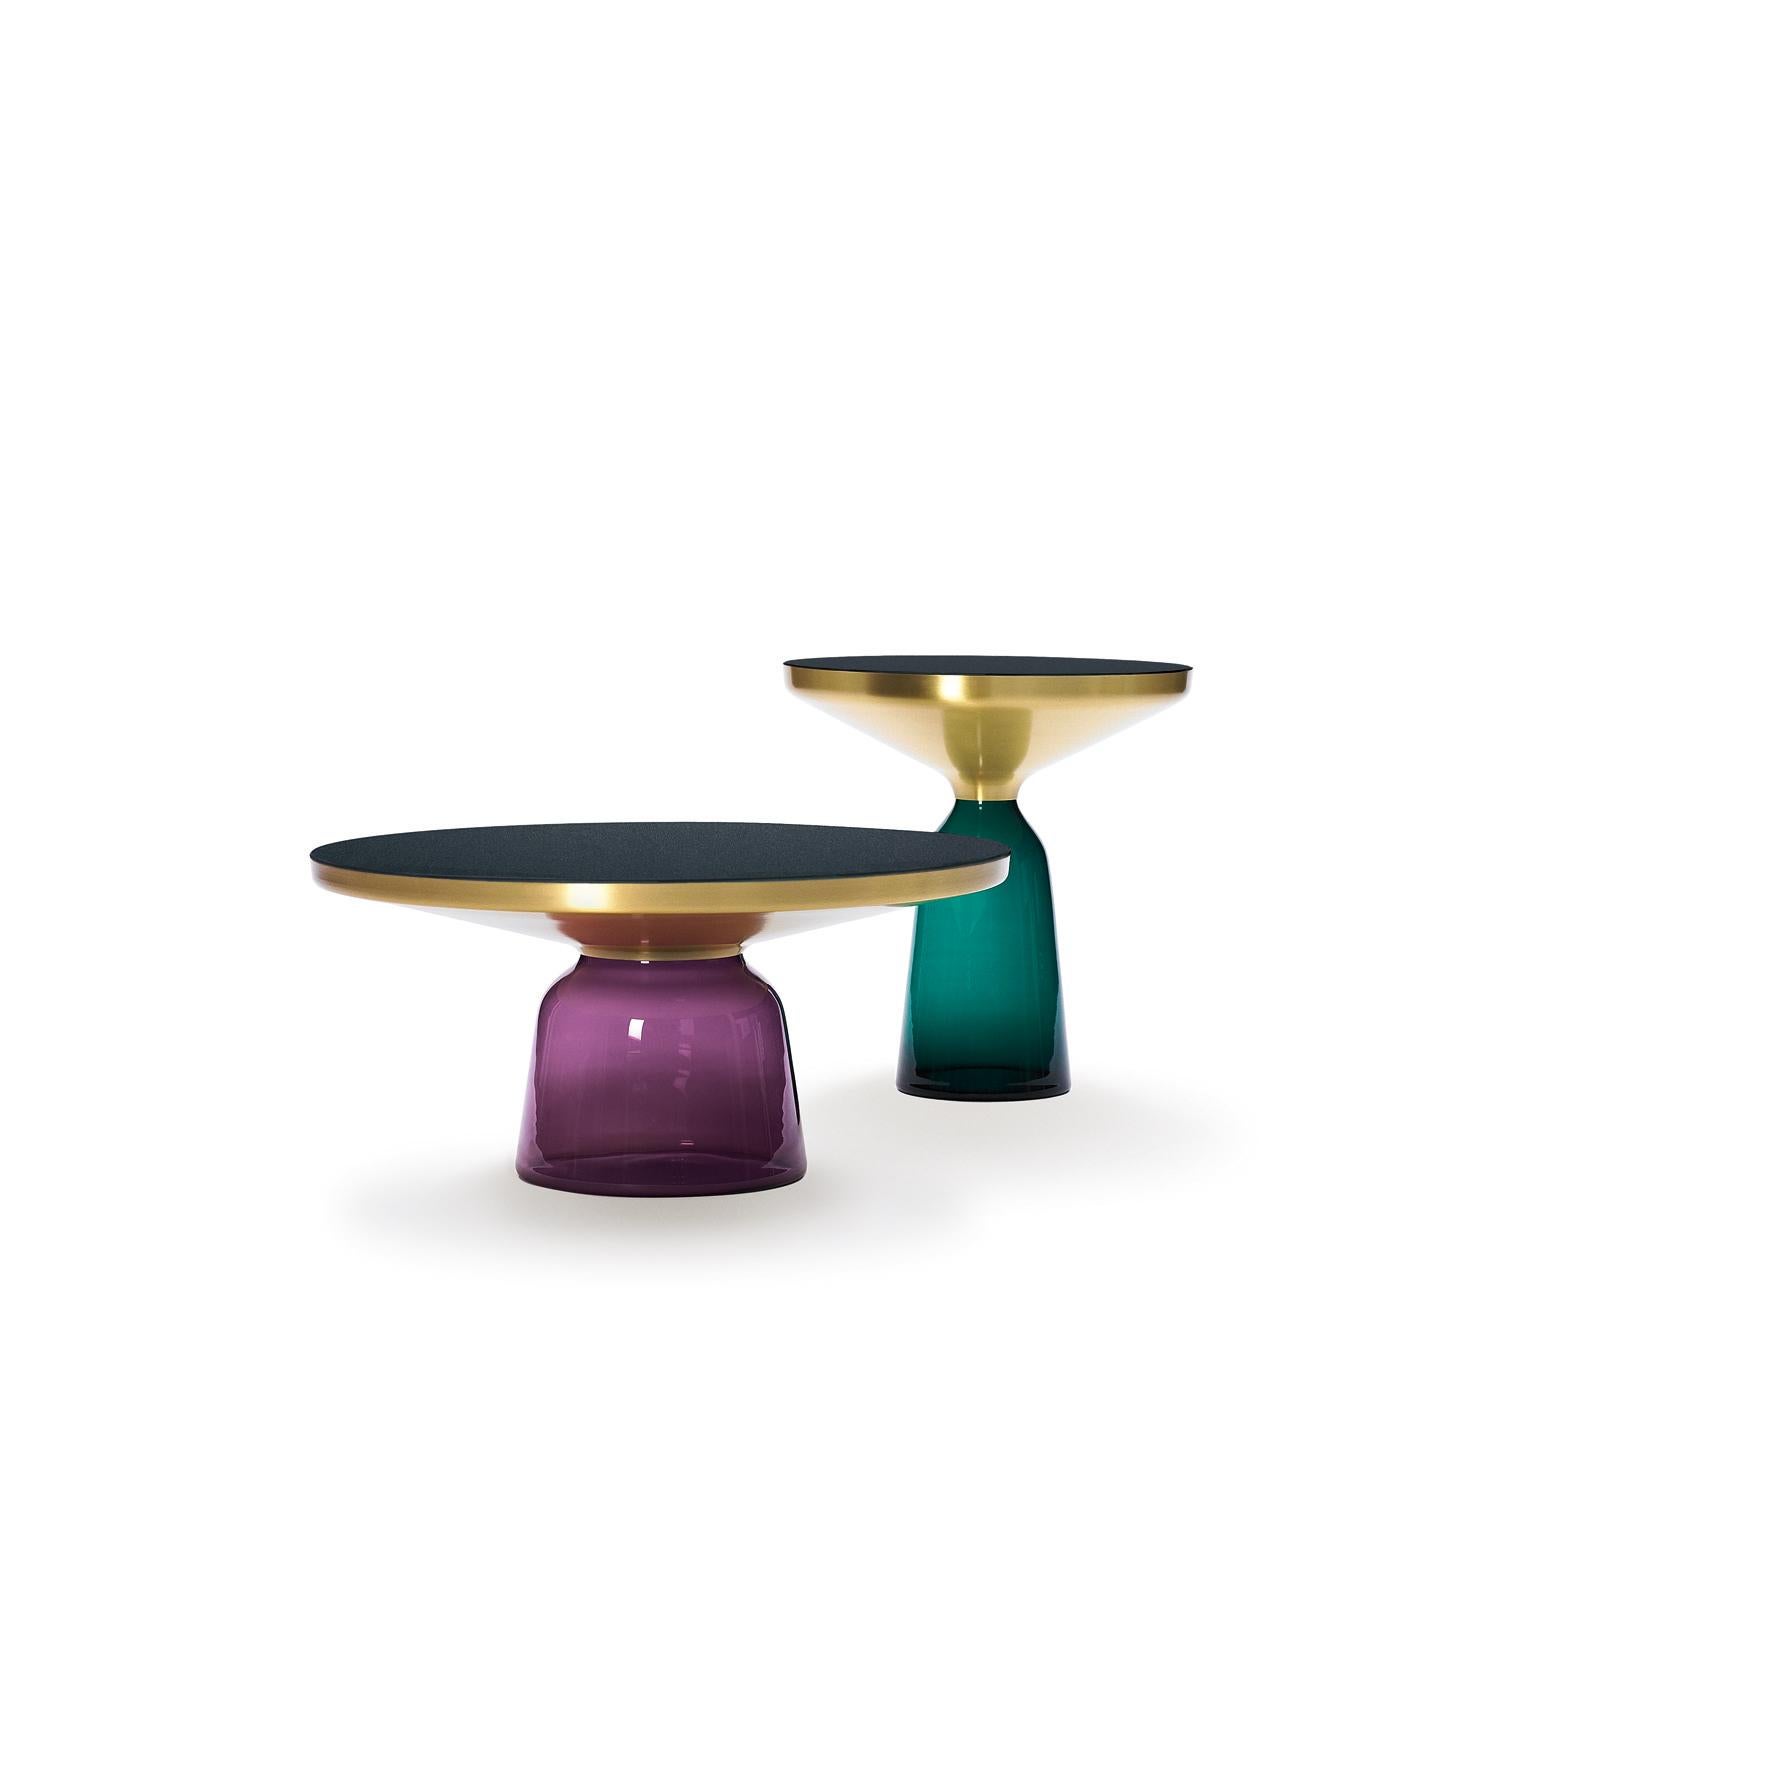 The Bell table by Sebastian Herkner turns our perceptual habits on their head, using the lightweight, fragile material of glass as base for a metal top that seems to float above it. hand blown in the traditional manner using a wooden mold, the